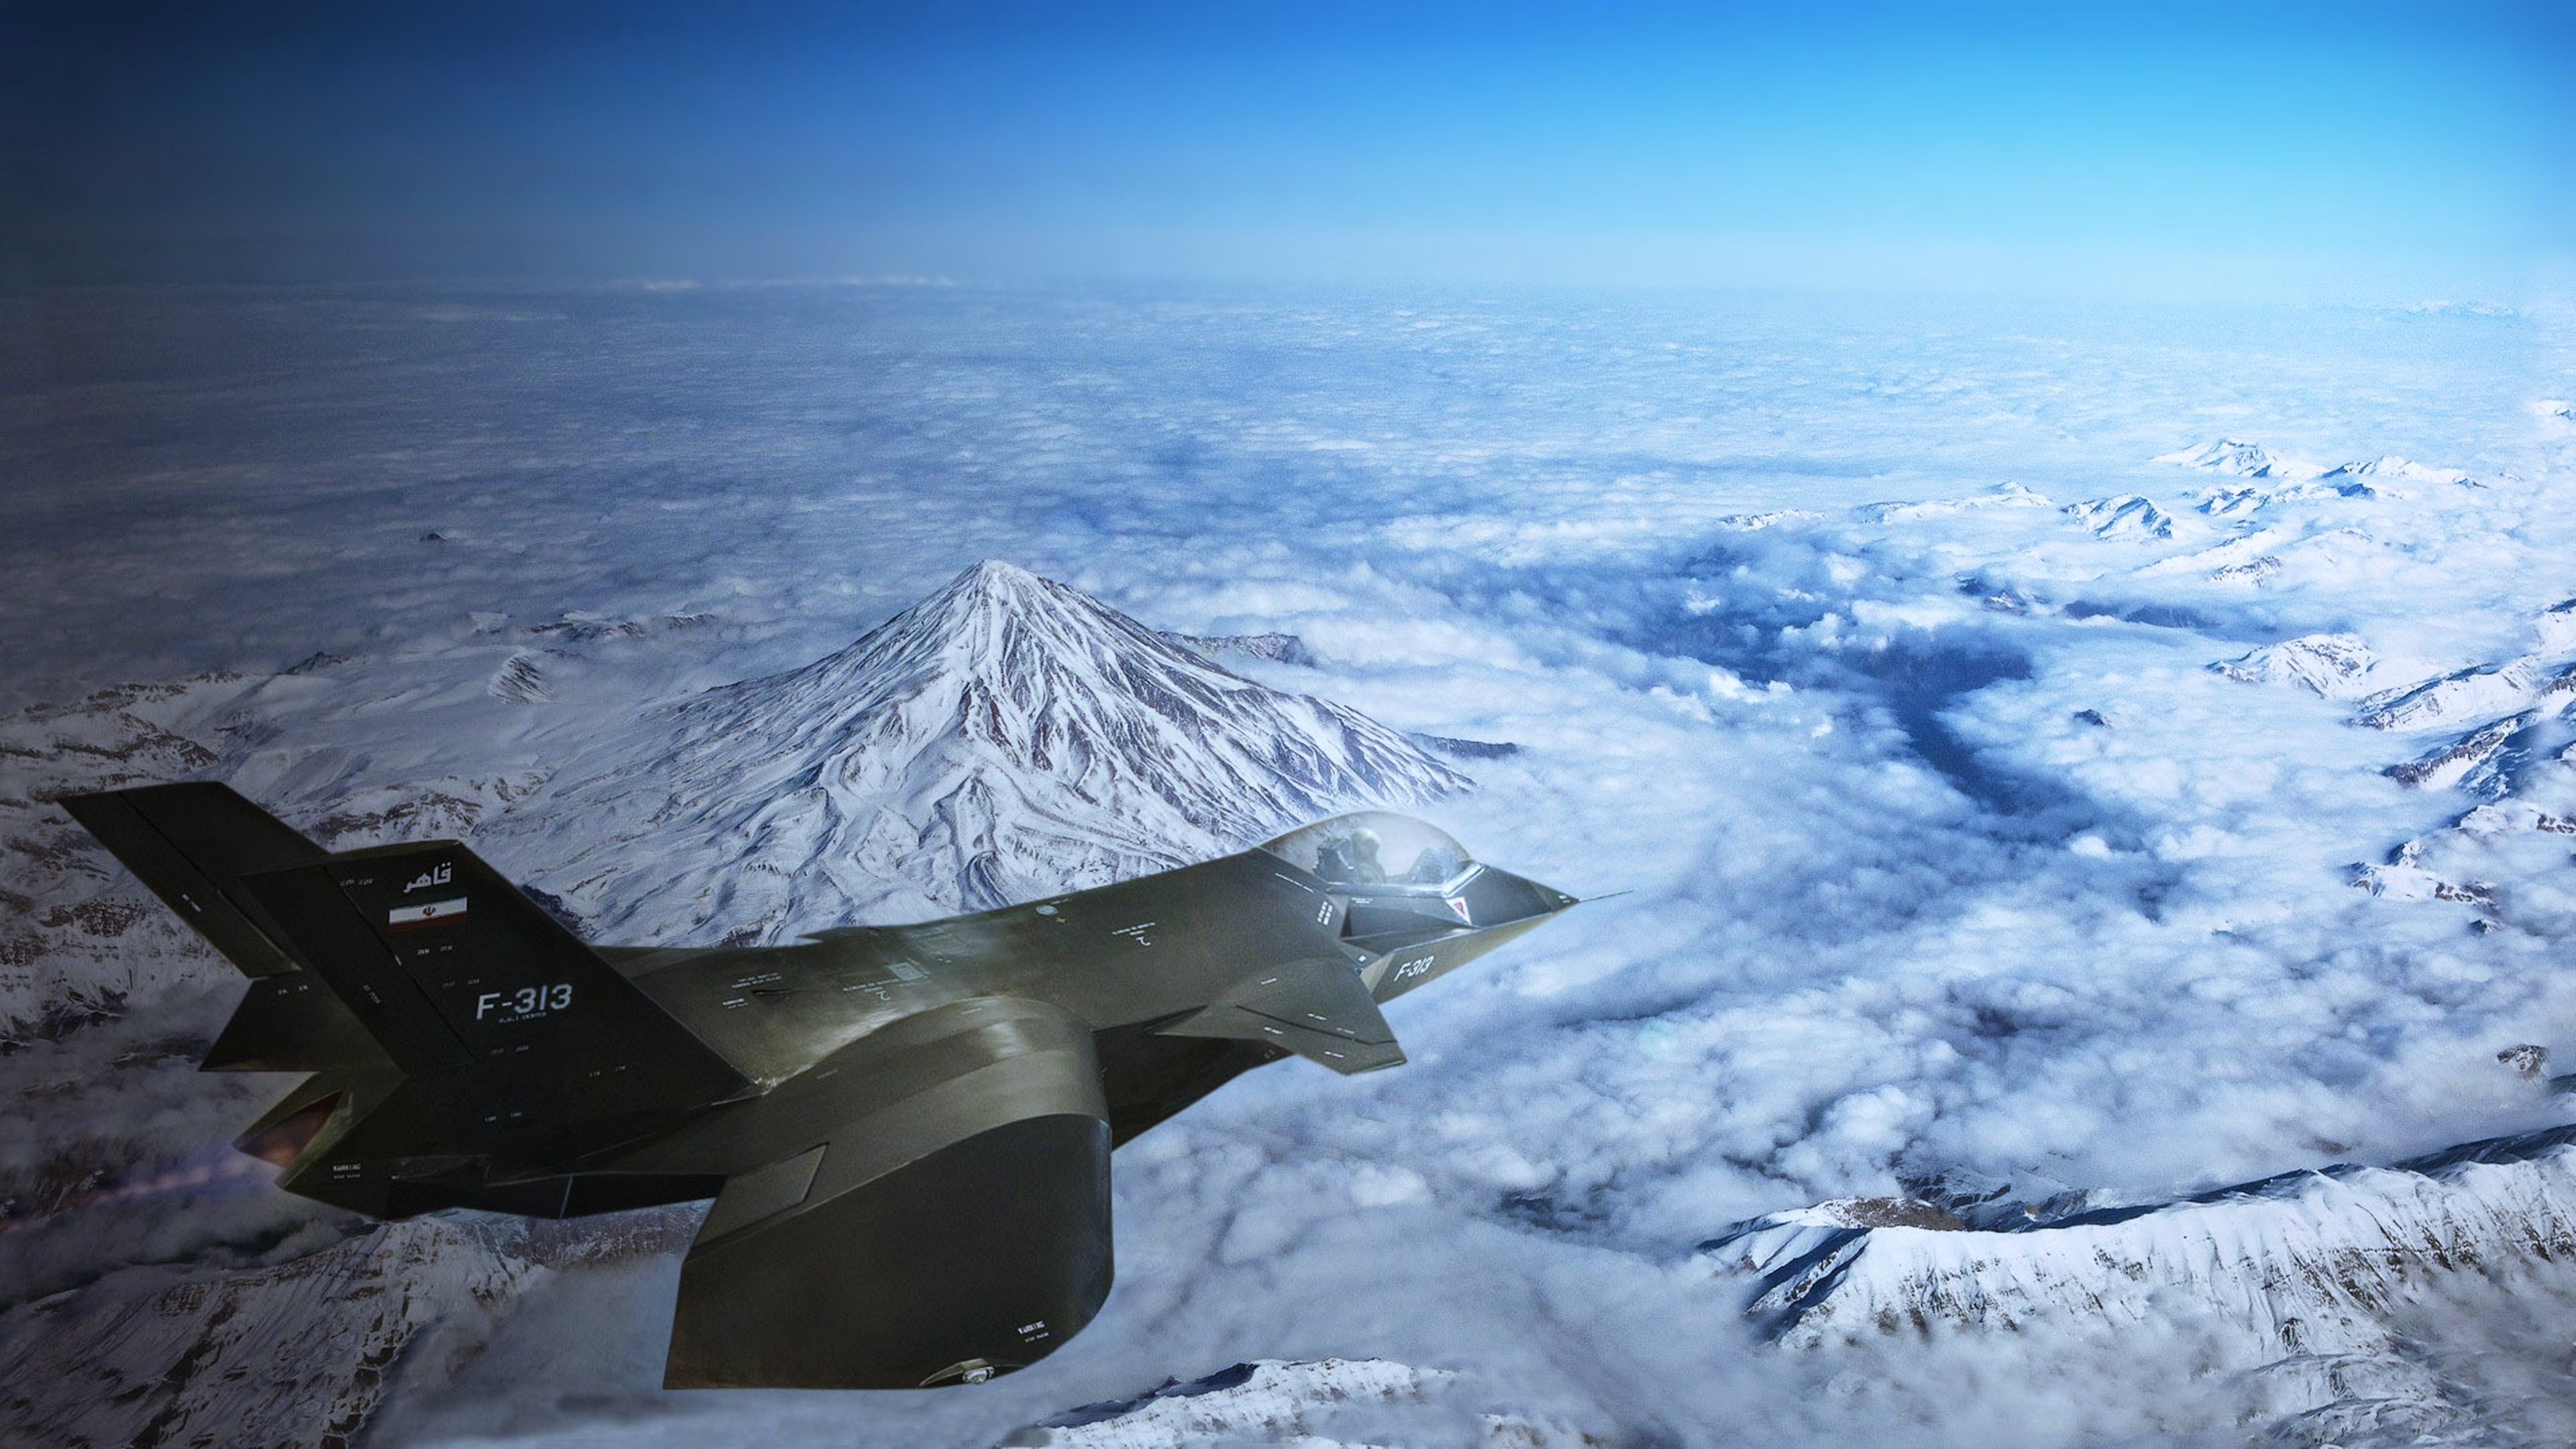 aircraft, Bombs, Fighter, Flight, Military, Missiles, Shells, Qaher, F313, Iran, Landscapes, Snow, Mountains, Sky, Clouds Wallpaper